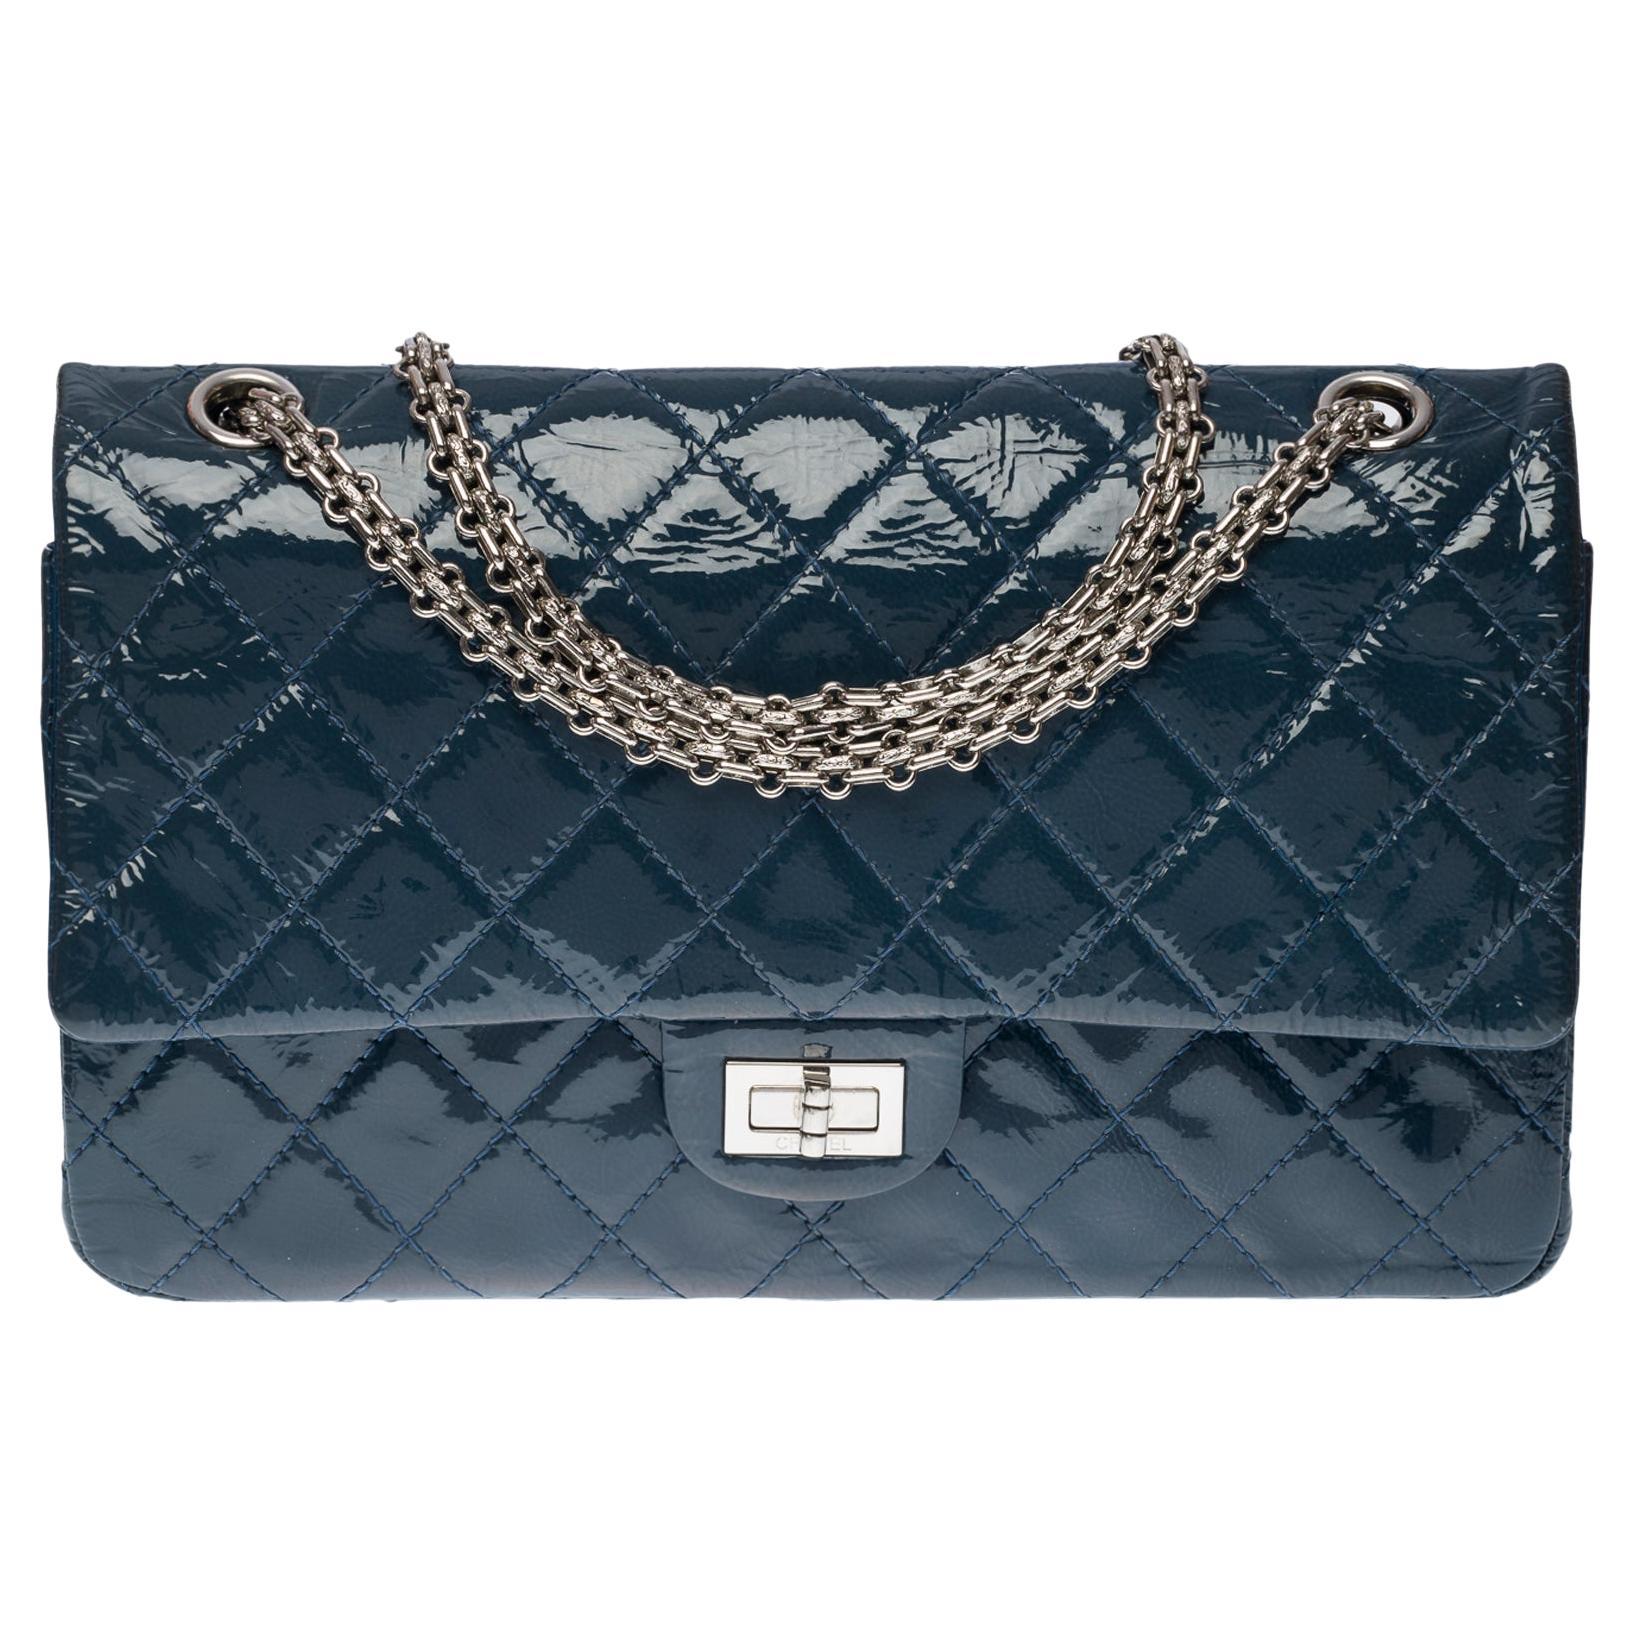 Chanel flap bag Blue Navy blue Dark blue Leather Patent leather